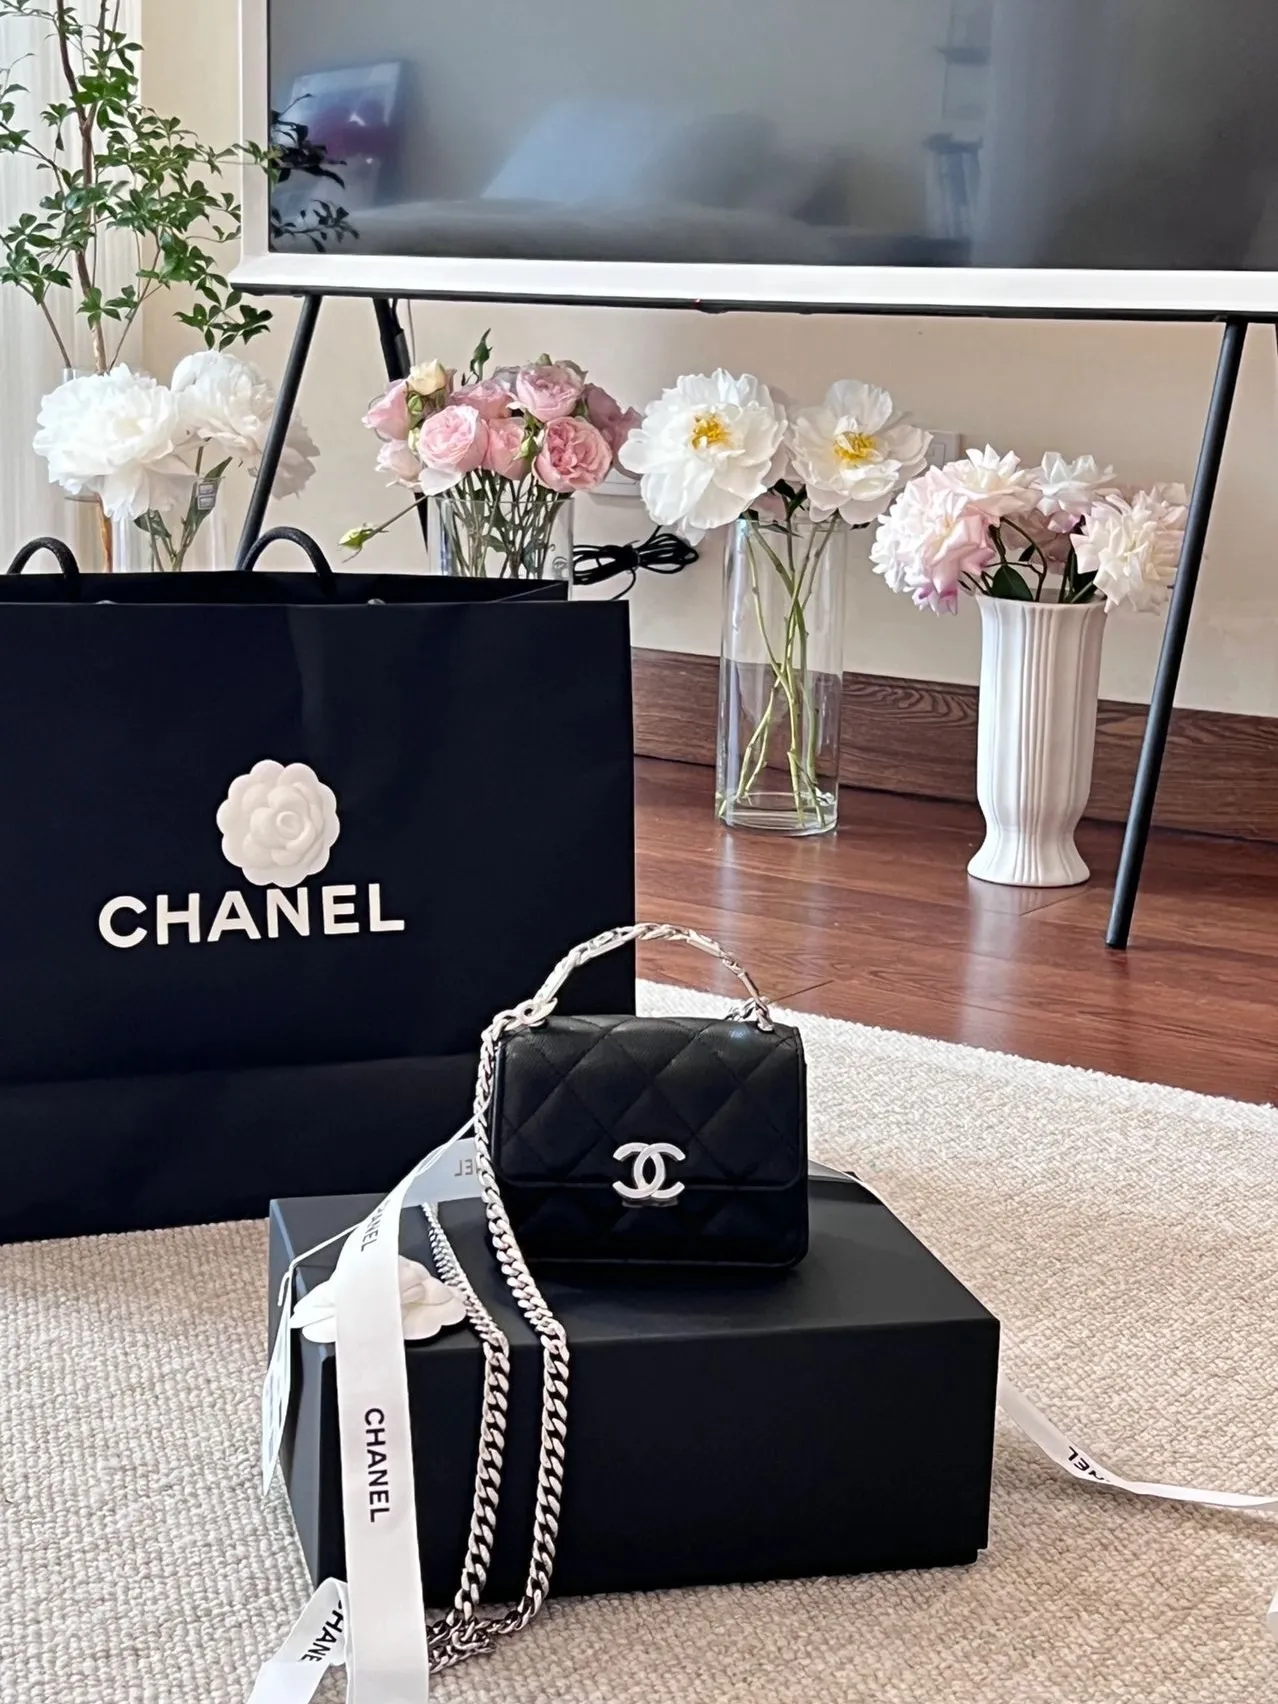 Shopping Together, Chanel Mini Flap Bag 👜🛍, Gallery posted by Zoey 💎